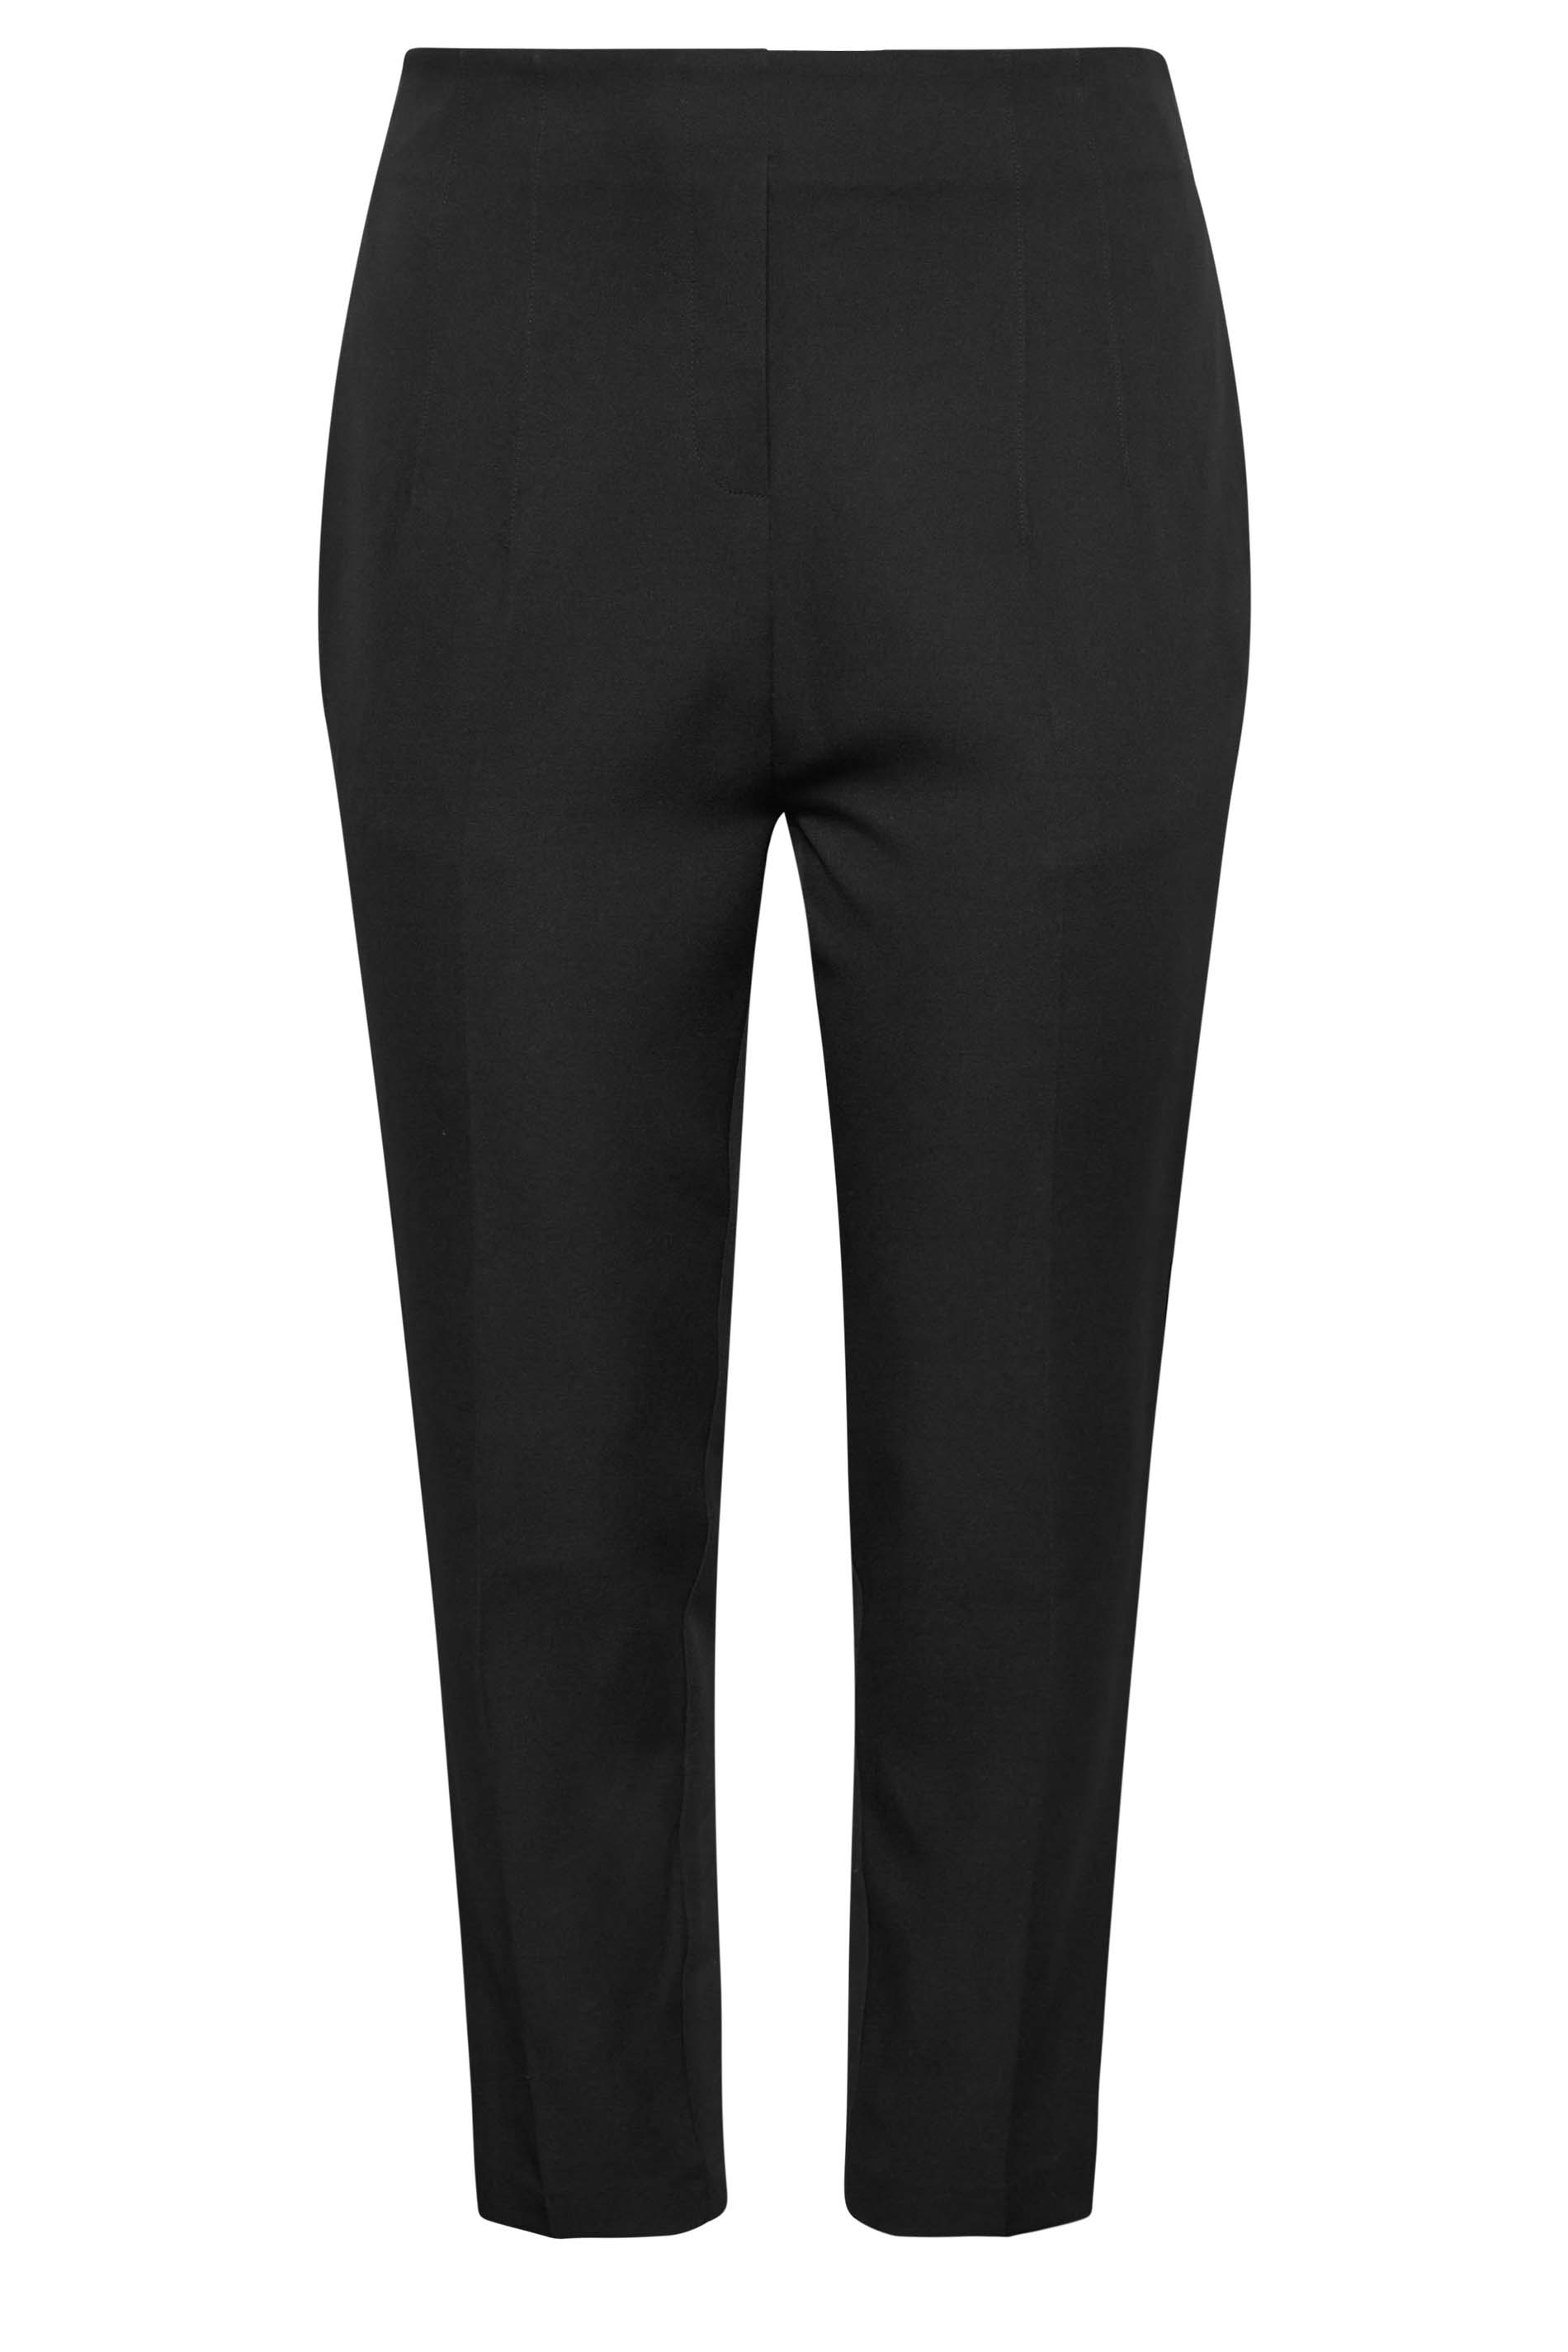 YOURS Plus Size Black Darted Waist Tapered Trousers